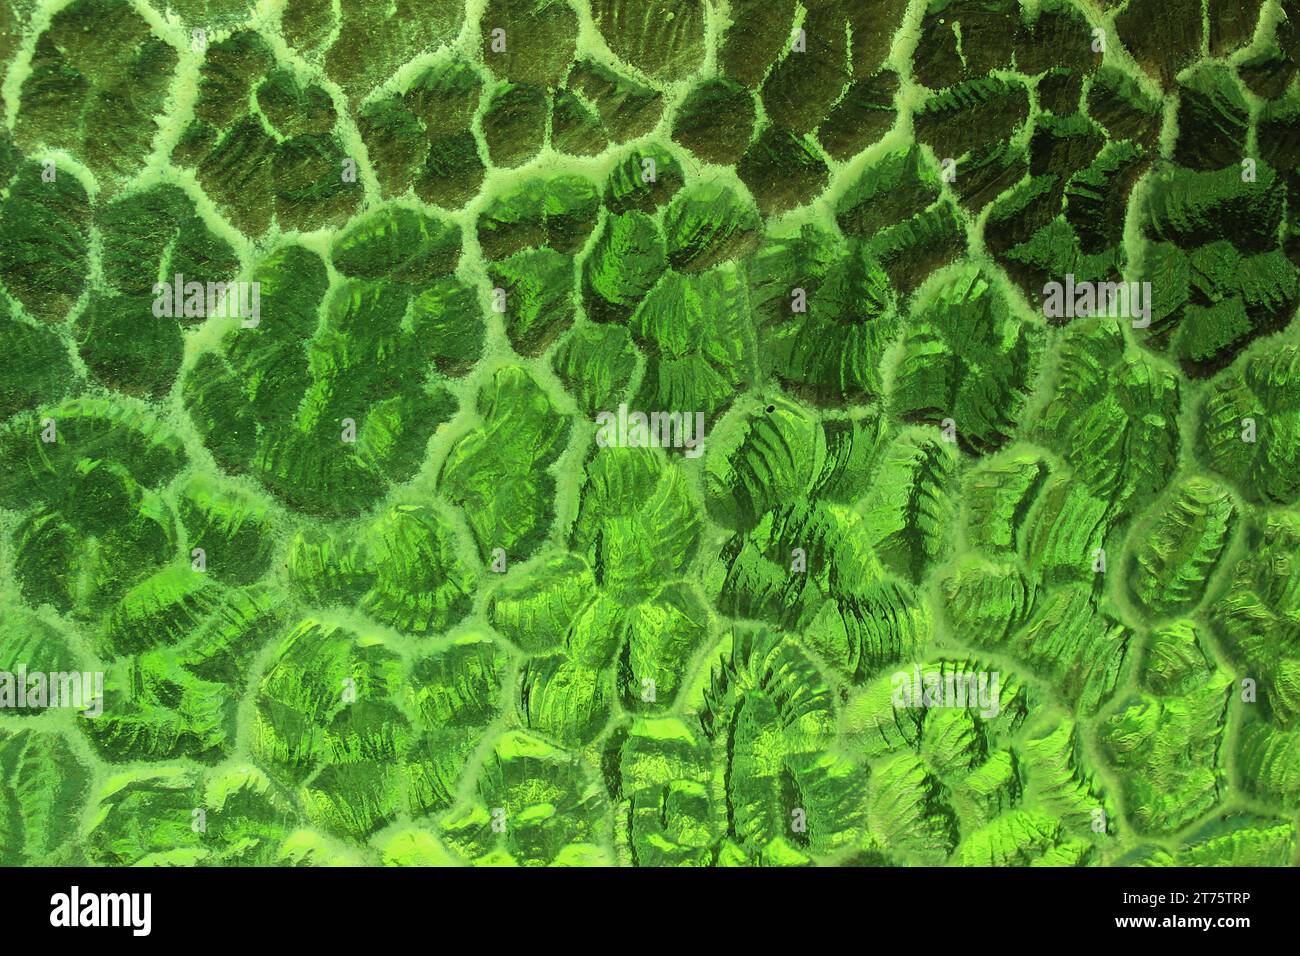 Textured glass with a pattern of curved reliefs, colored in shades of green, creating a gradient of hues with the interplay of light and shadow. Stock Photo